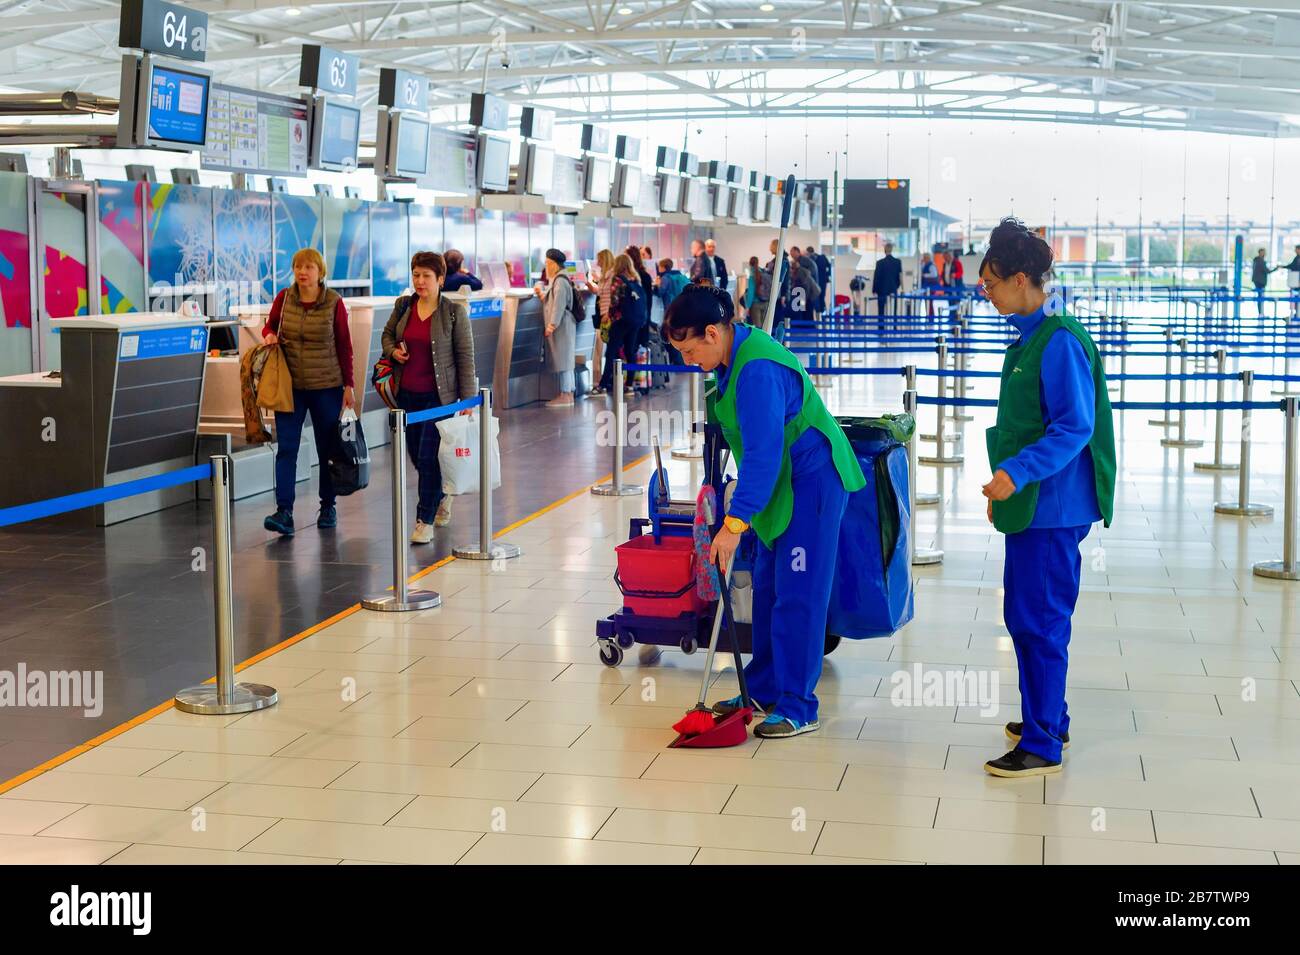 LARNACA, CYPRUS - FEBRUARY 21, 2019: Cleaning women in uniform with broom, scoop and buckets in the international airport terminal, row of people at p Stock Photo